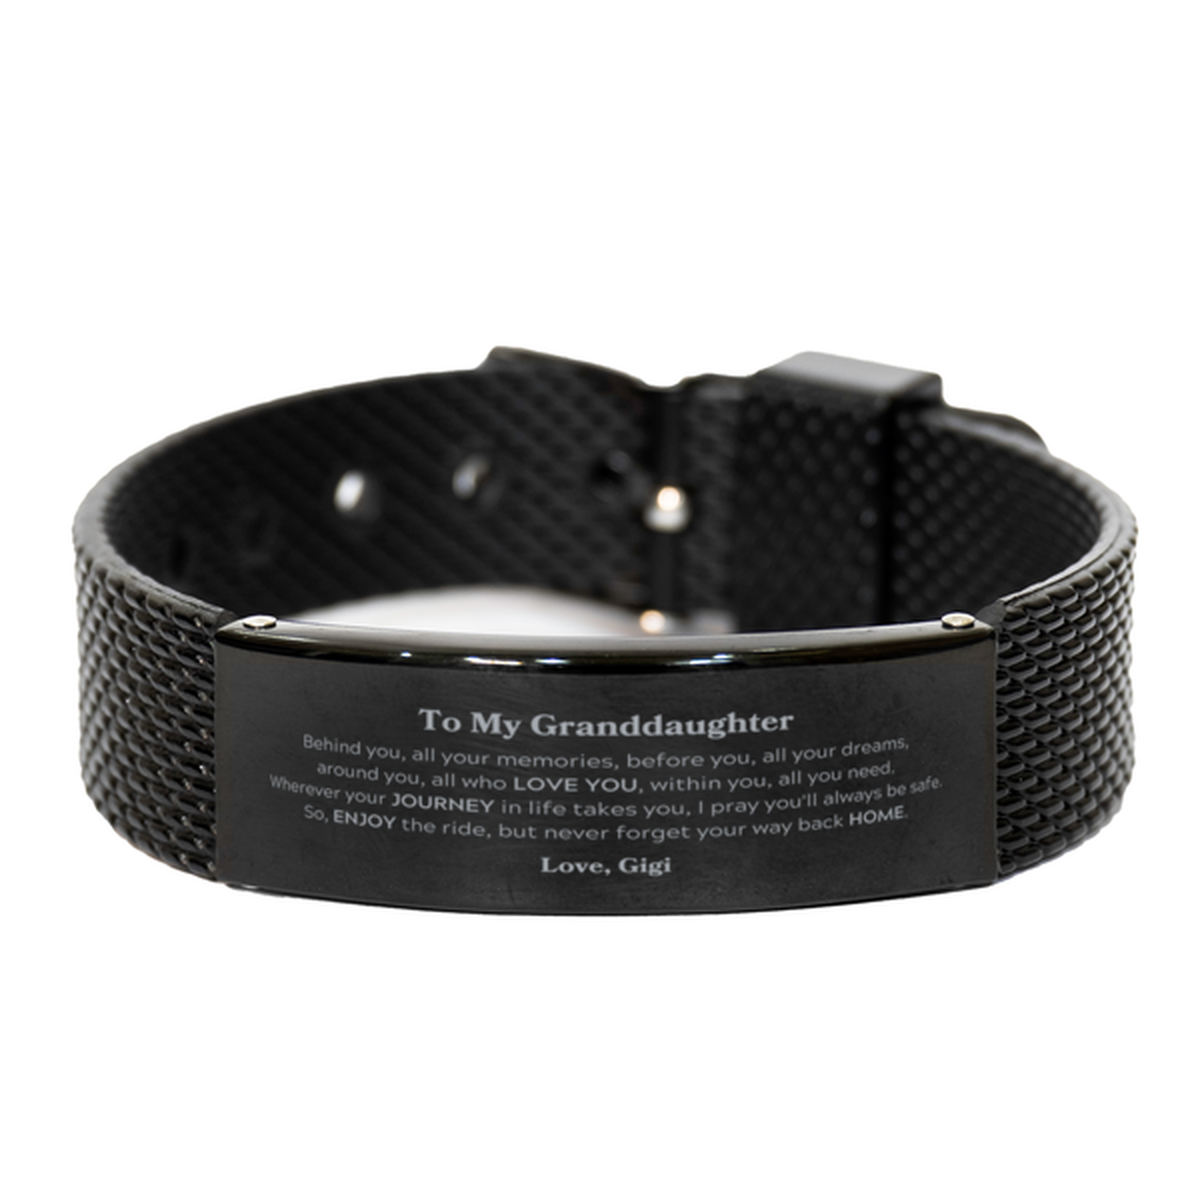 To My Granddaughter Graduation Gifts from Gigi, Granddaughter Black Shark Mesh Bracelet Christmas Birthday Gifts for Granddaughter Behind you, all your memories, before you, all your dreams. Love, Gigi